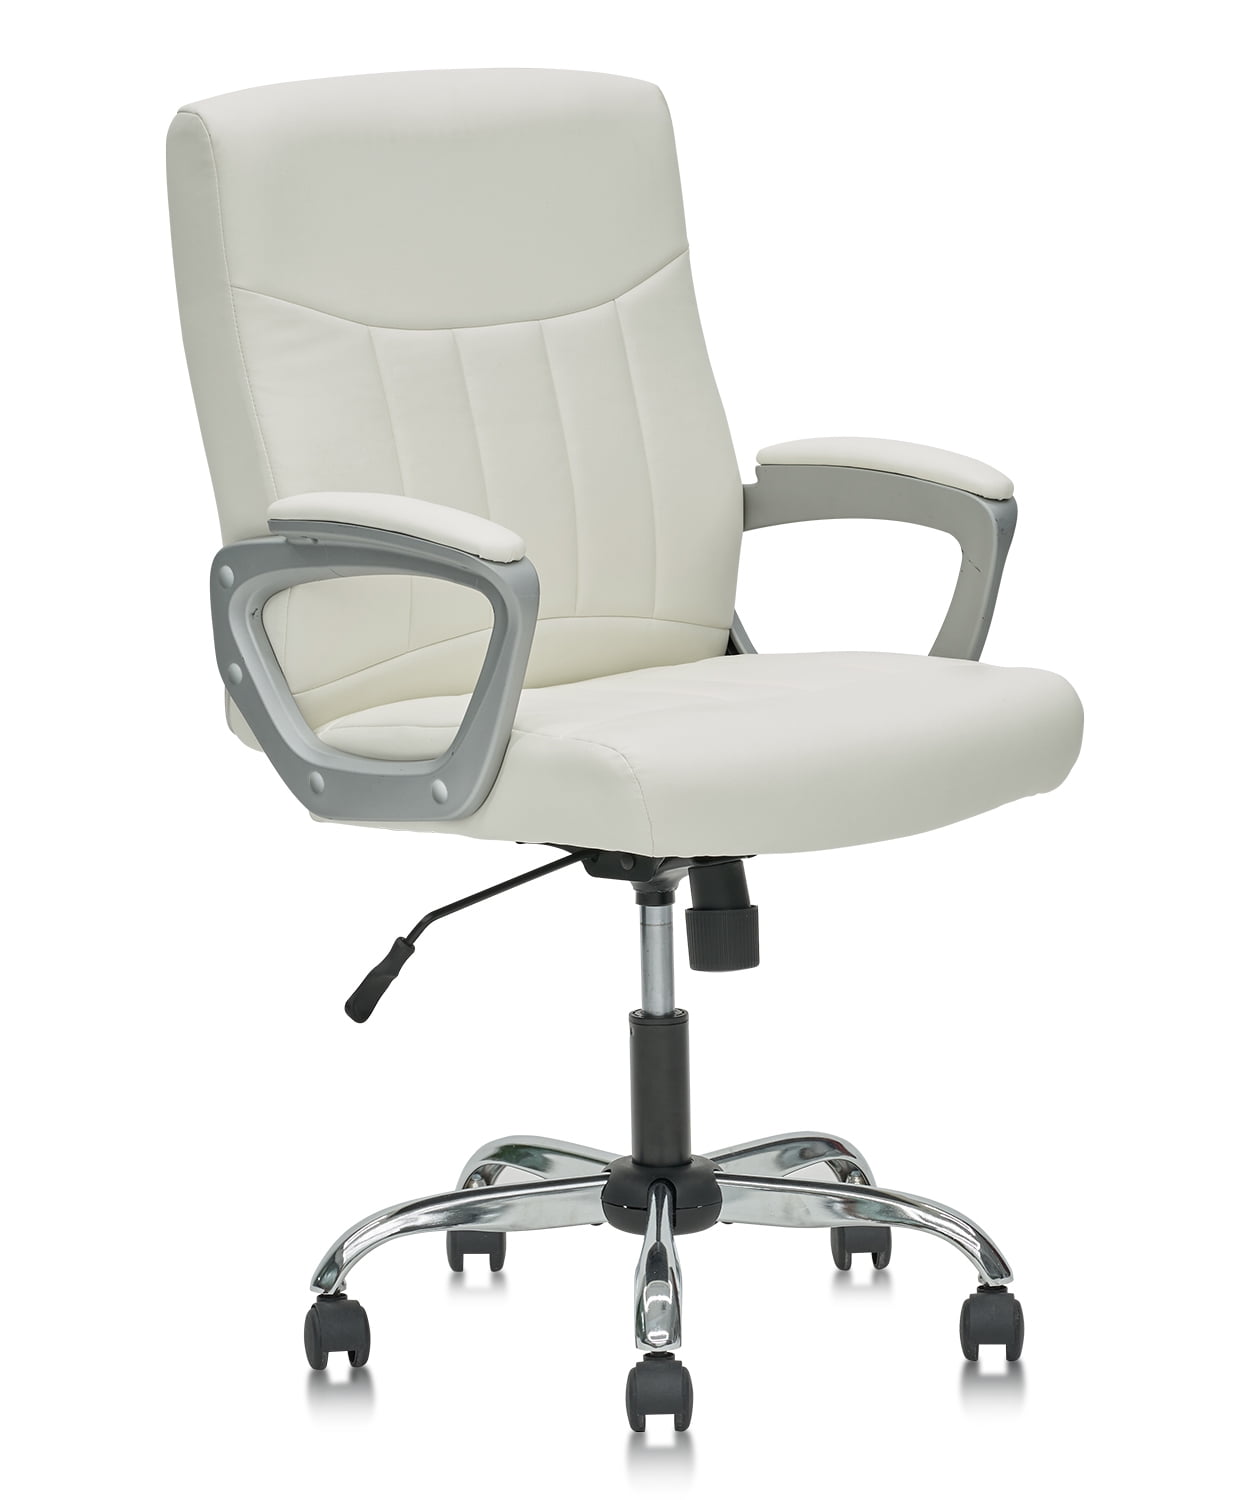 Office Swivel PU Leather Chair Padded Seat Computer Desk Chair Adjustable Height 